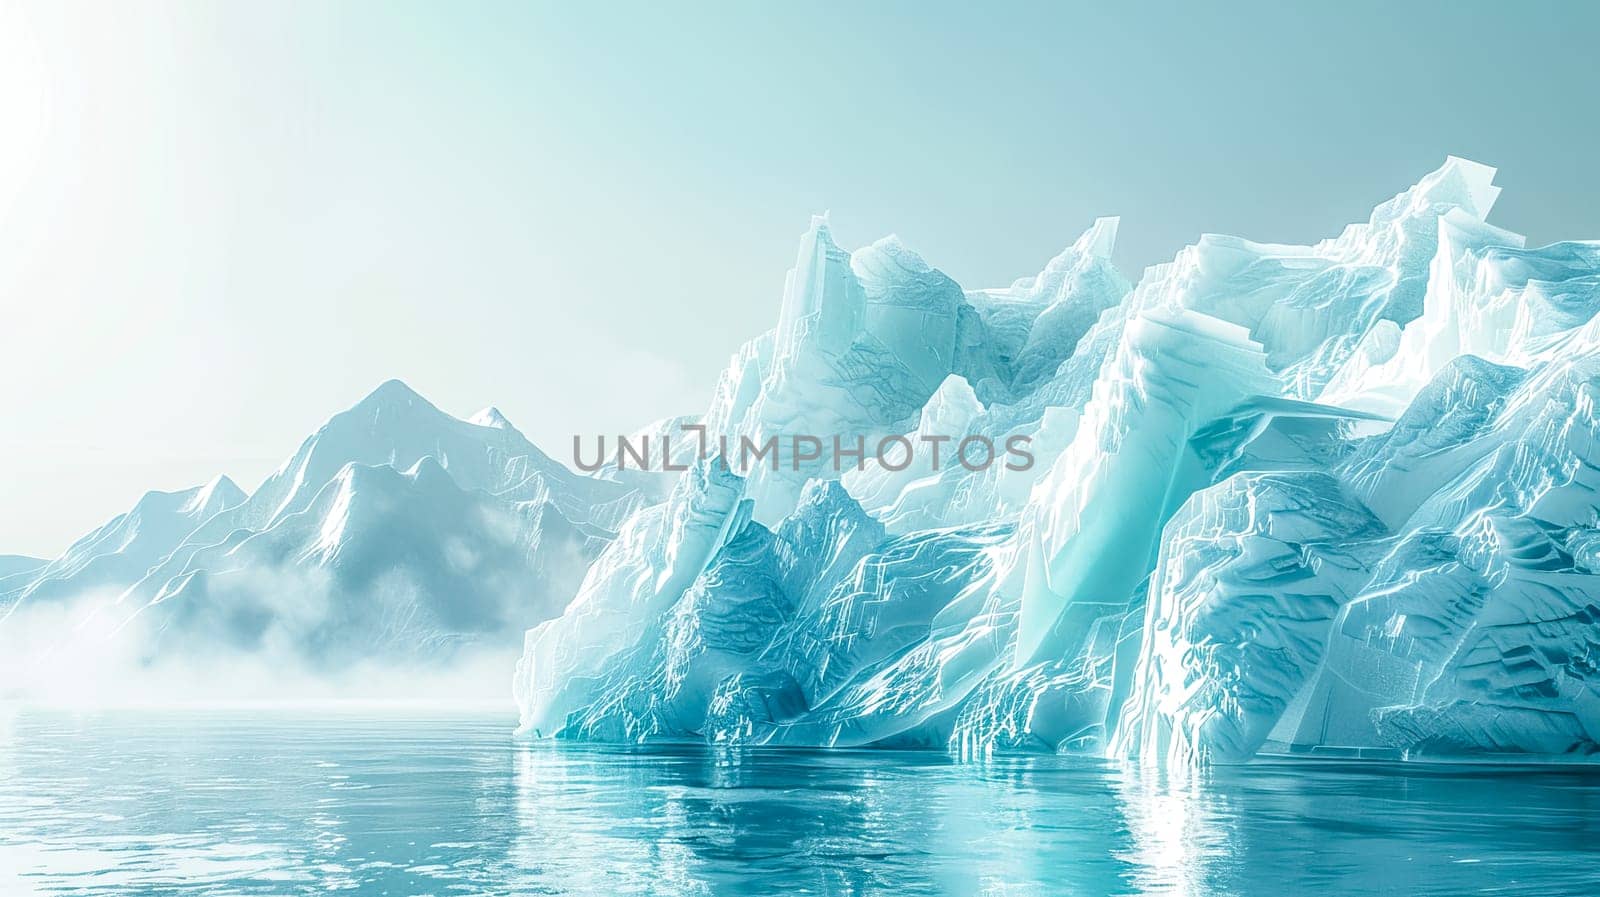 Tranquil scene of towering icebergs against a clear sky, reflecting in calm polar waters